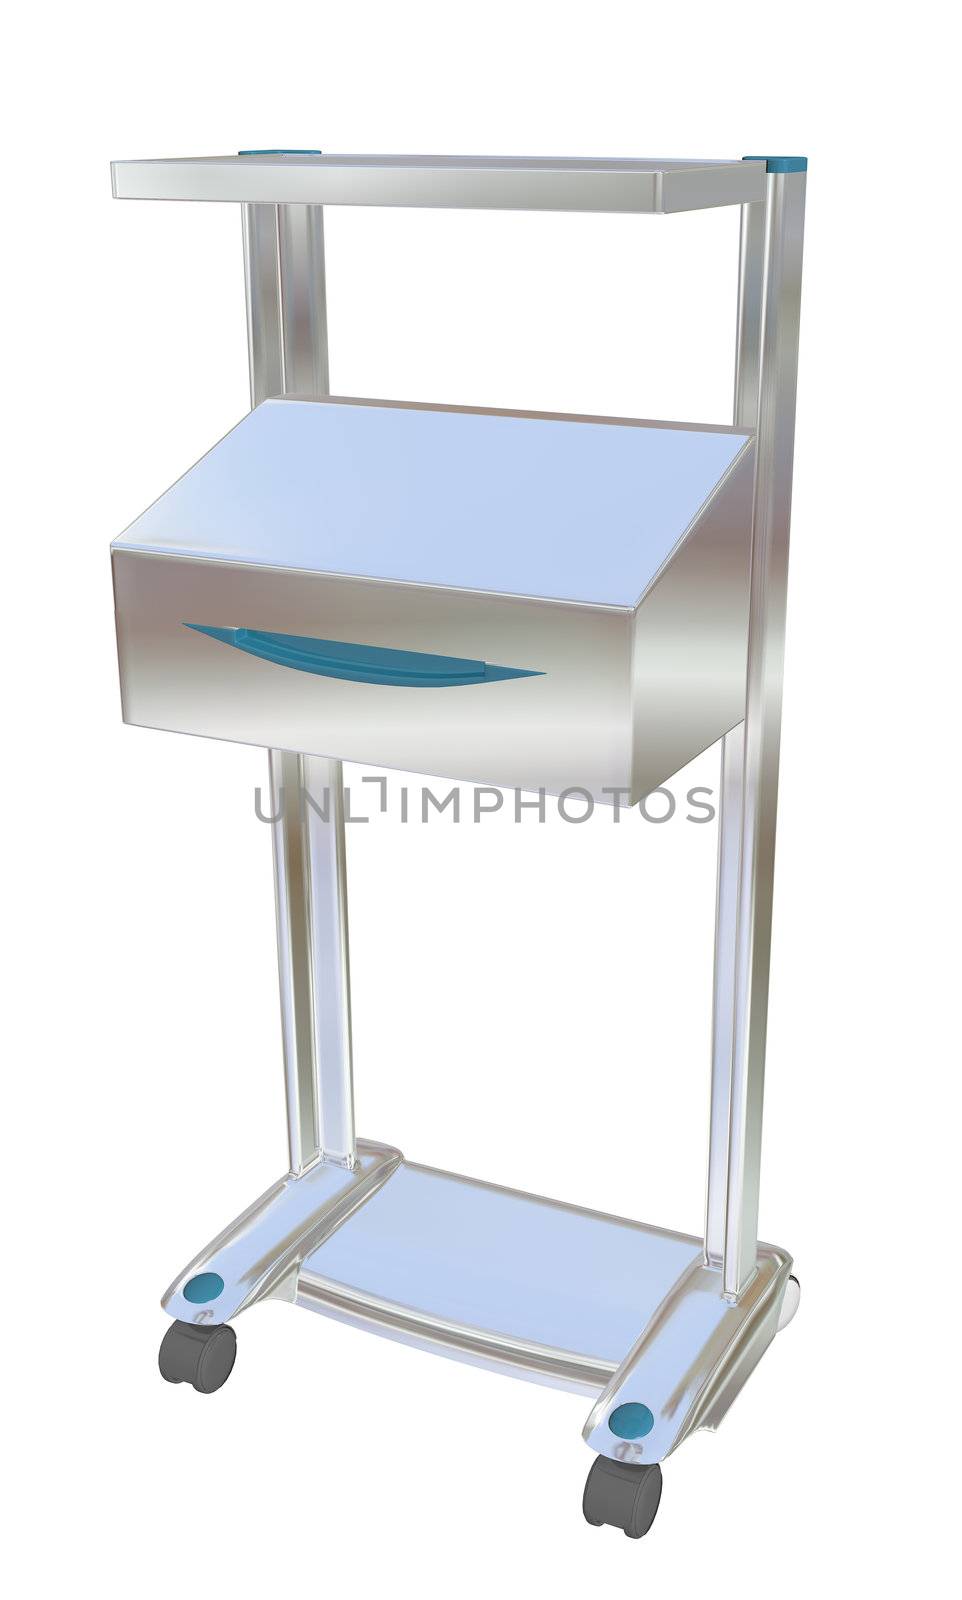 Mobile x-ray chart illuminator, metal, 3D illustration, isolated against a white background.